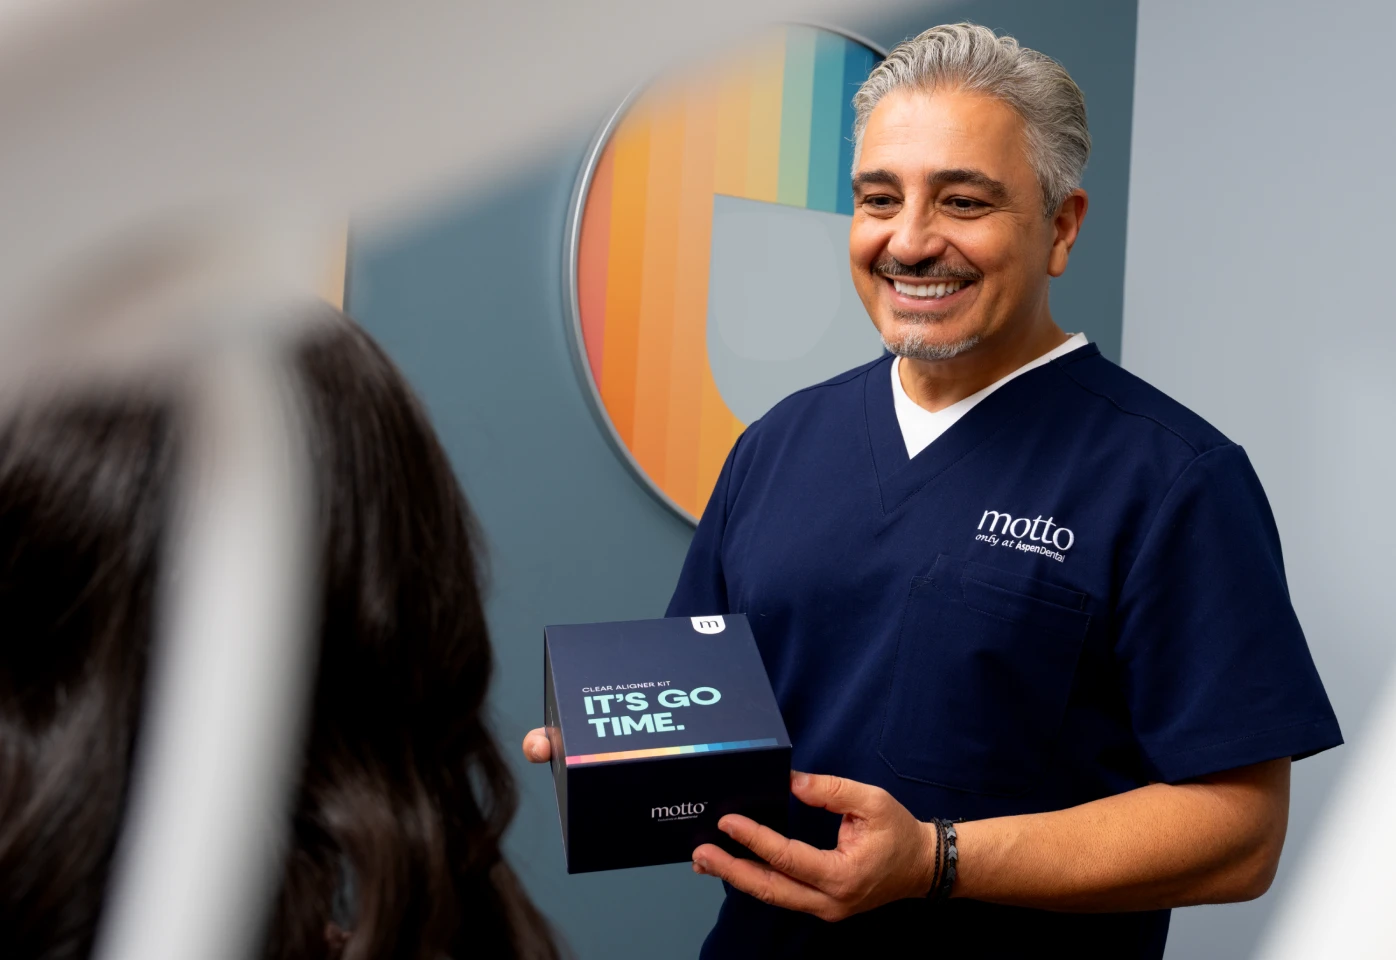 Dr. Attaii smiles while handing a Motto clear aligners box to a patient.